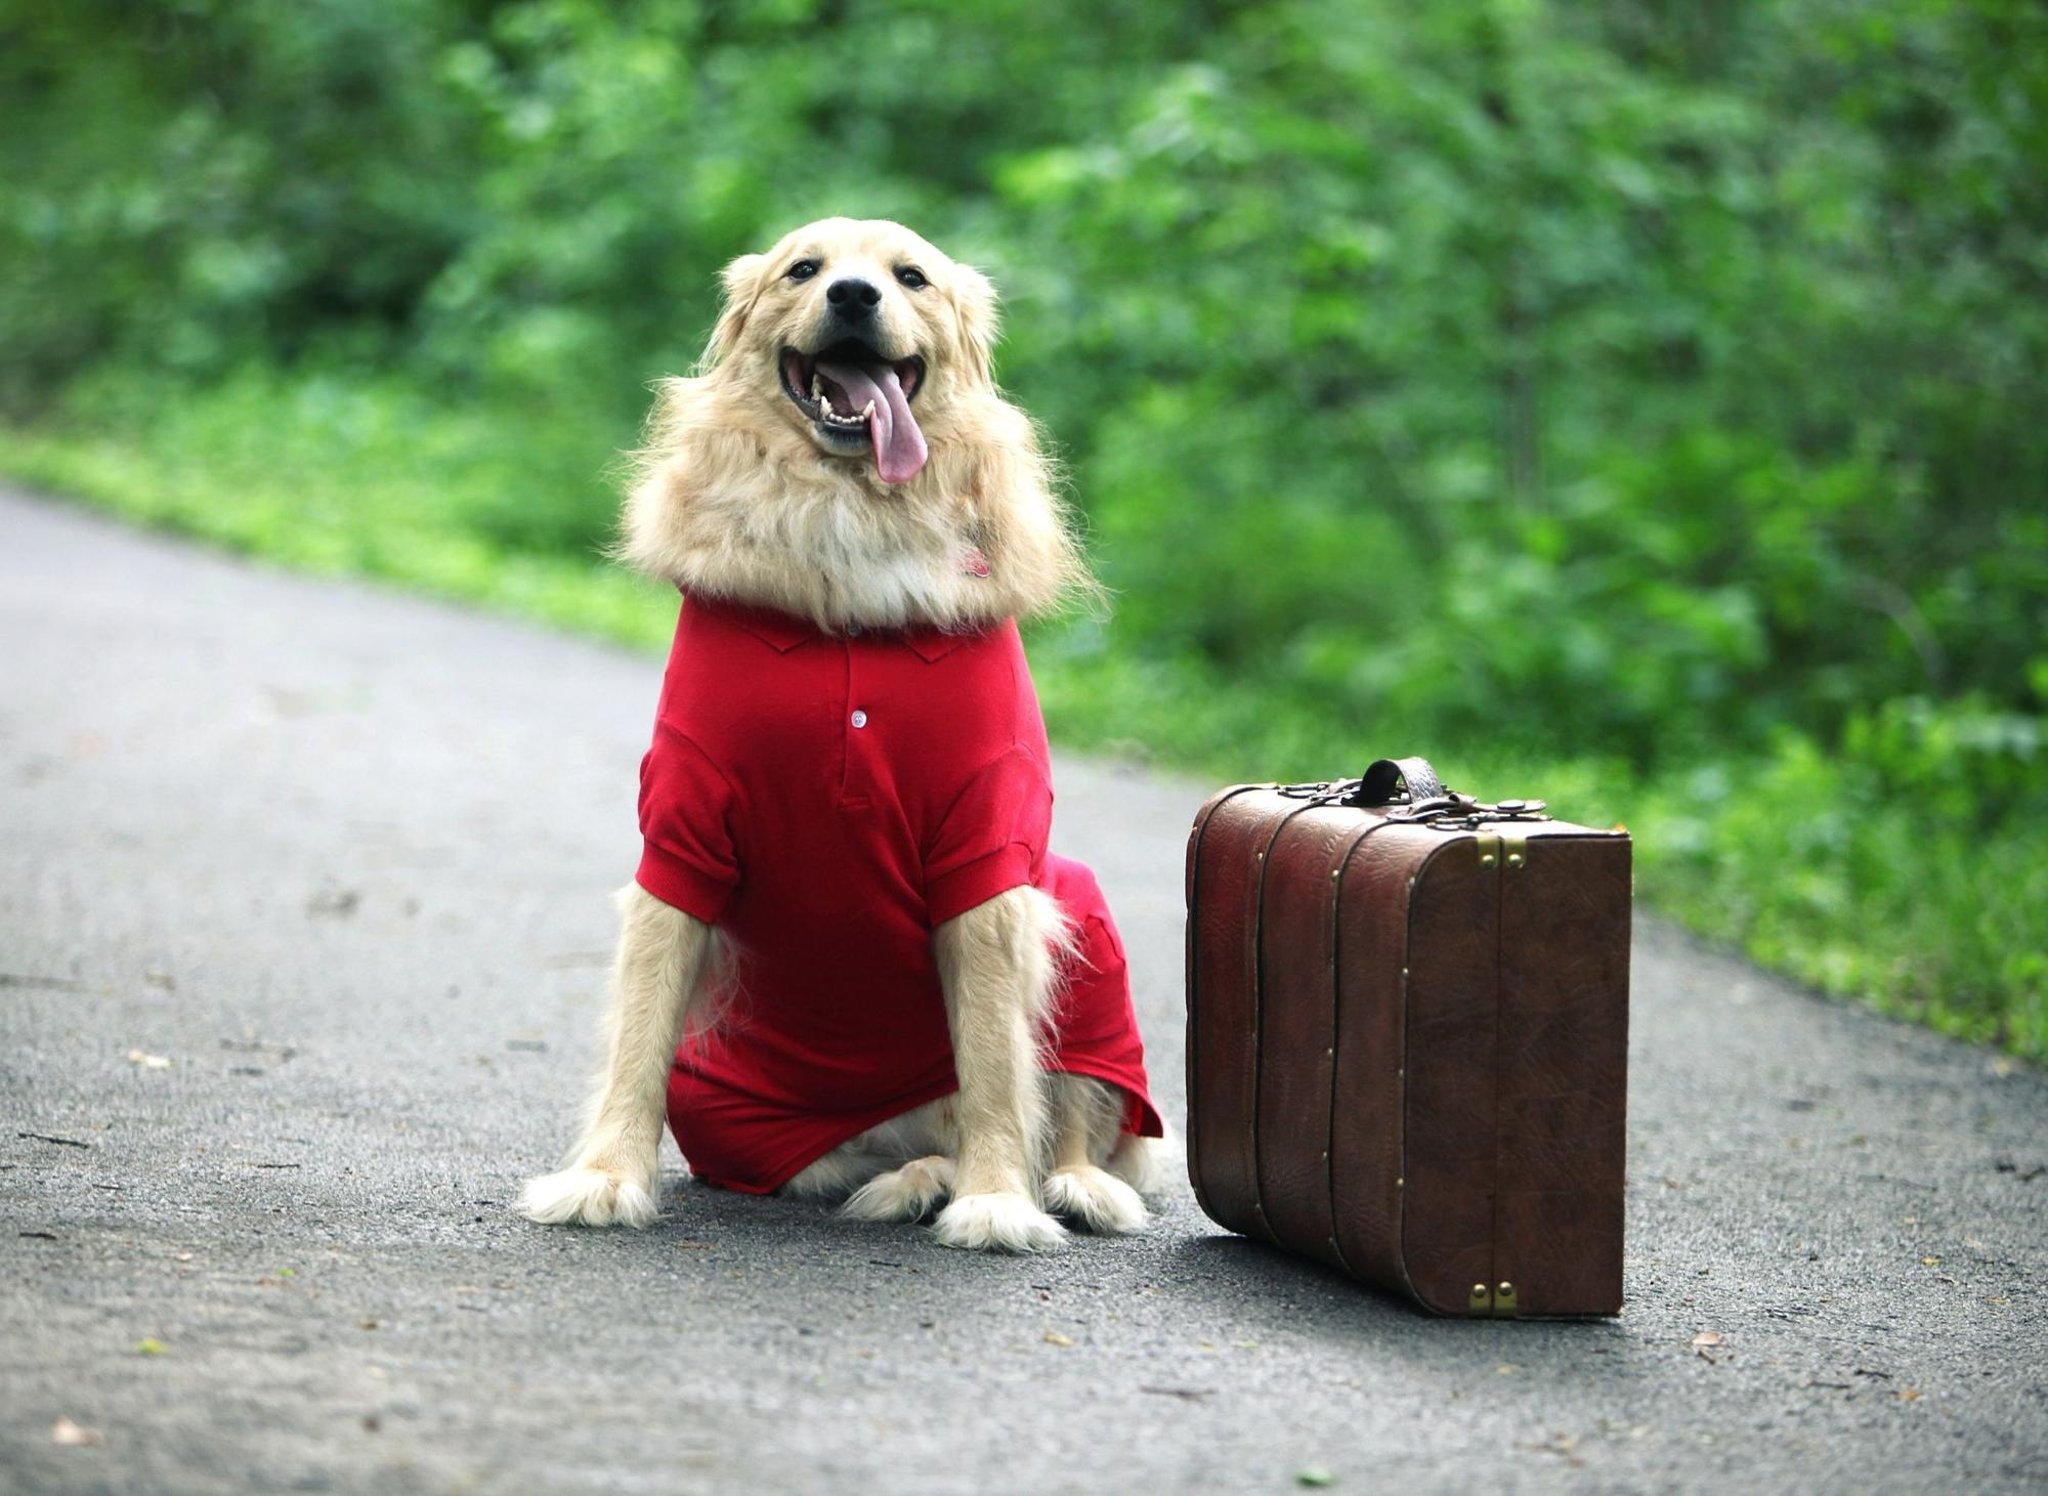 Dog friendly Easter holidays: These 10 expert tips will help you have a great caravan or camping break with your adorable pup